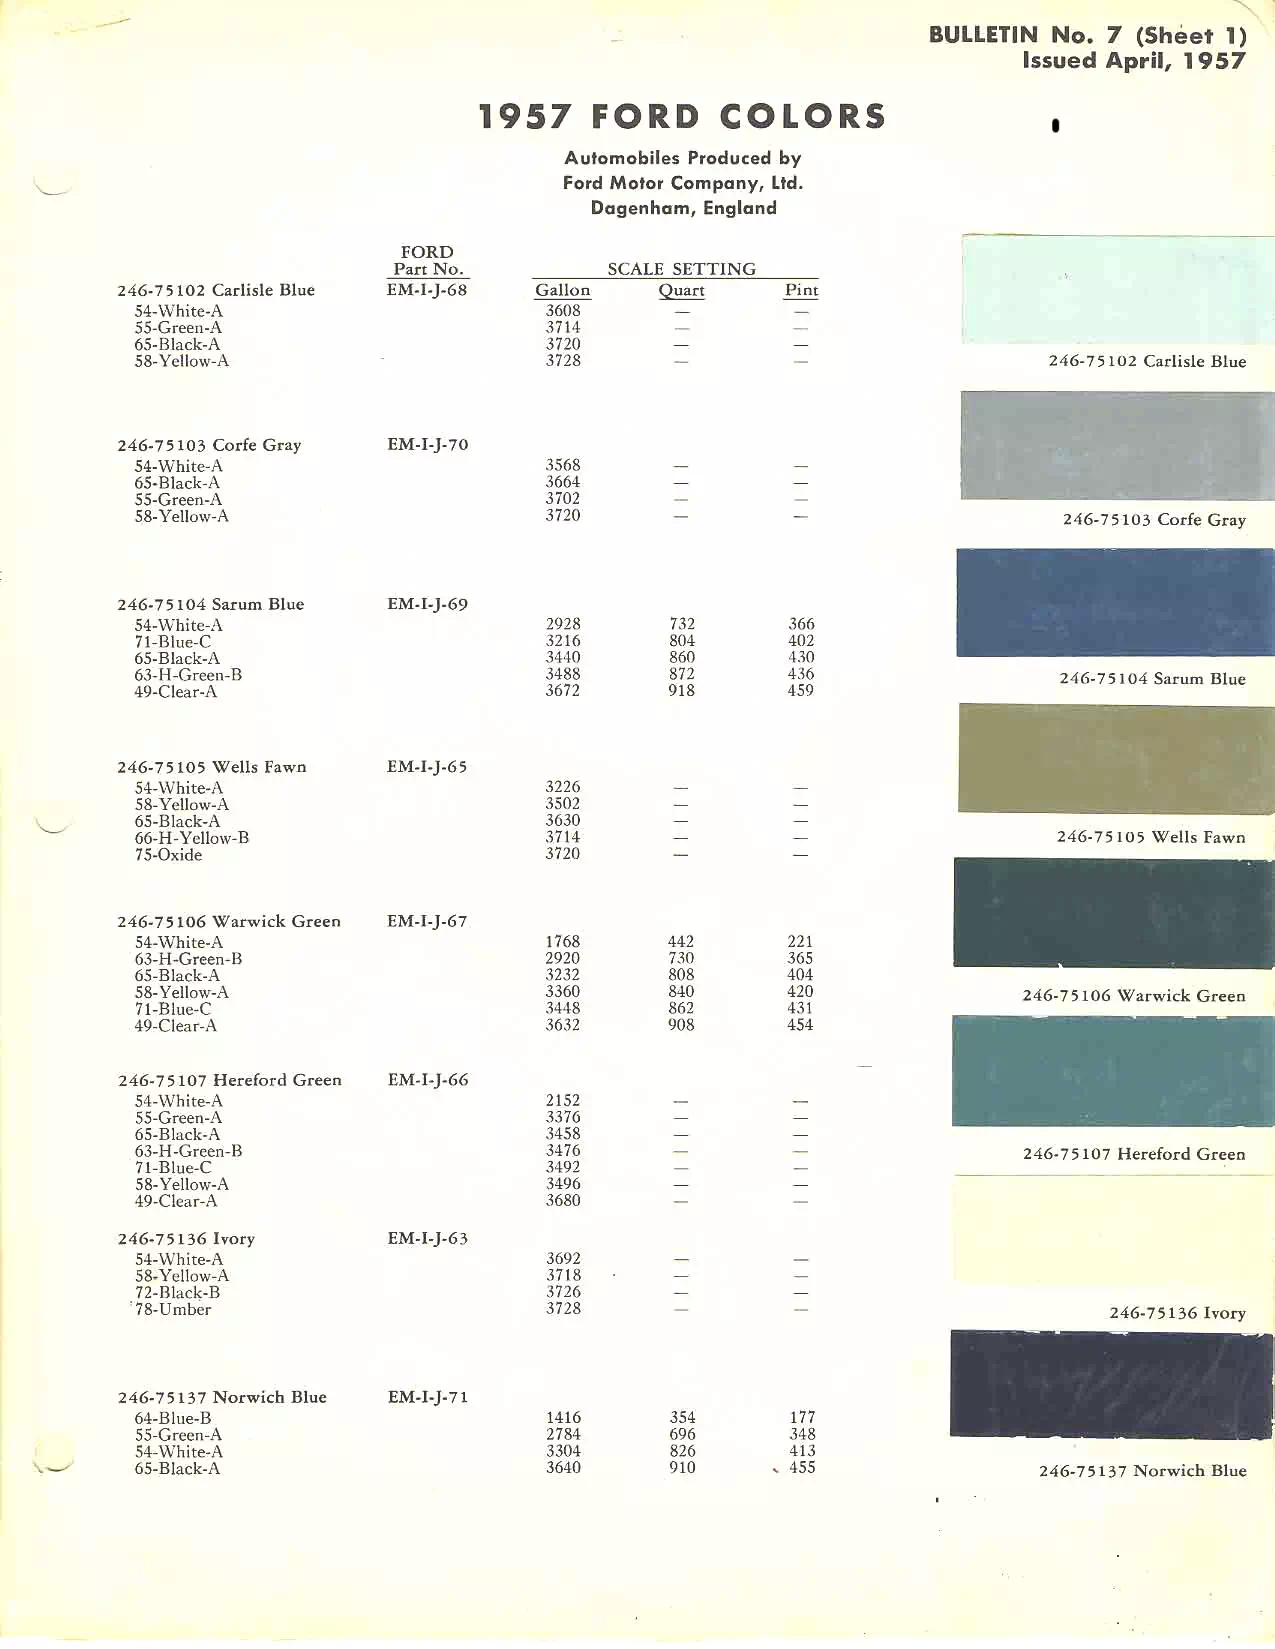 exterior colors, their codes, and example swatches used on the exterior of the vehicles in 1957